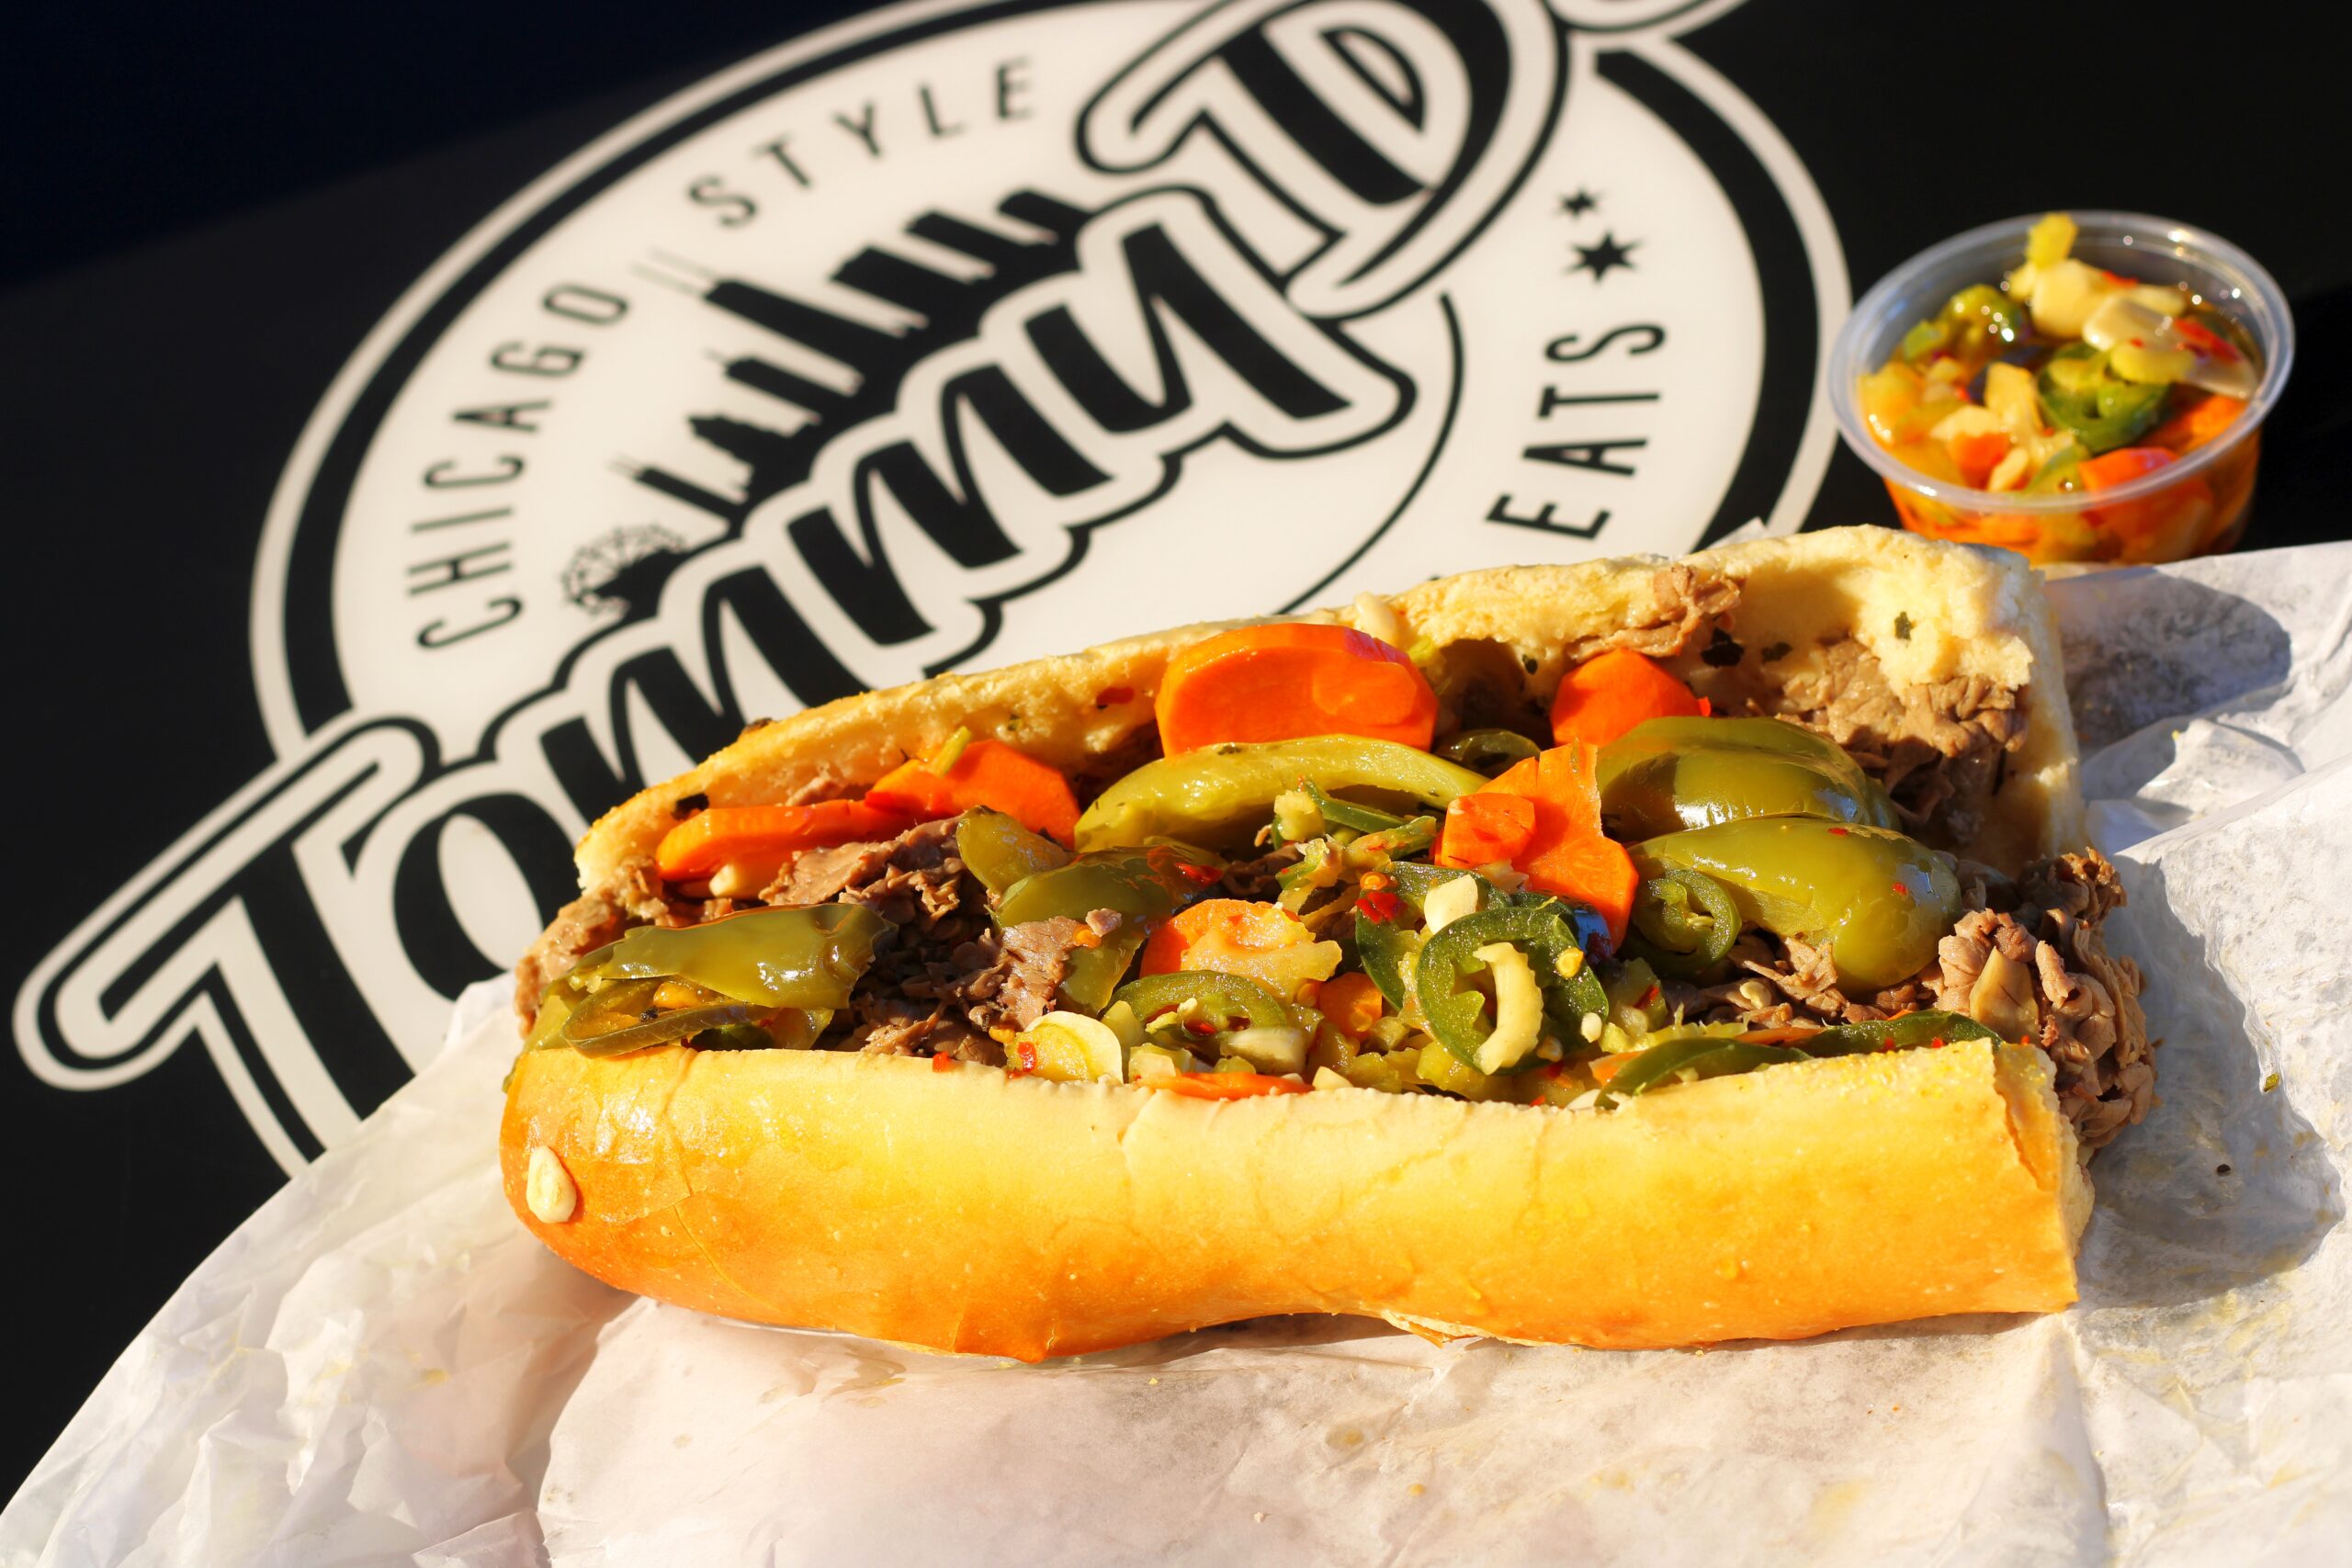 Italian Beef Sandwich at Tommy D's (Photo by Mark Whittaker)